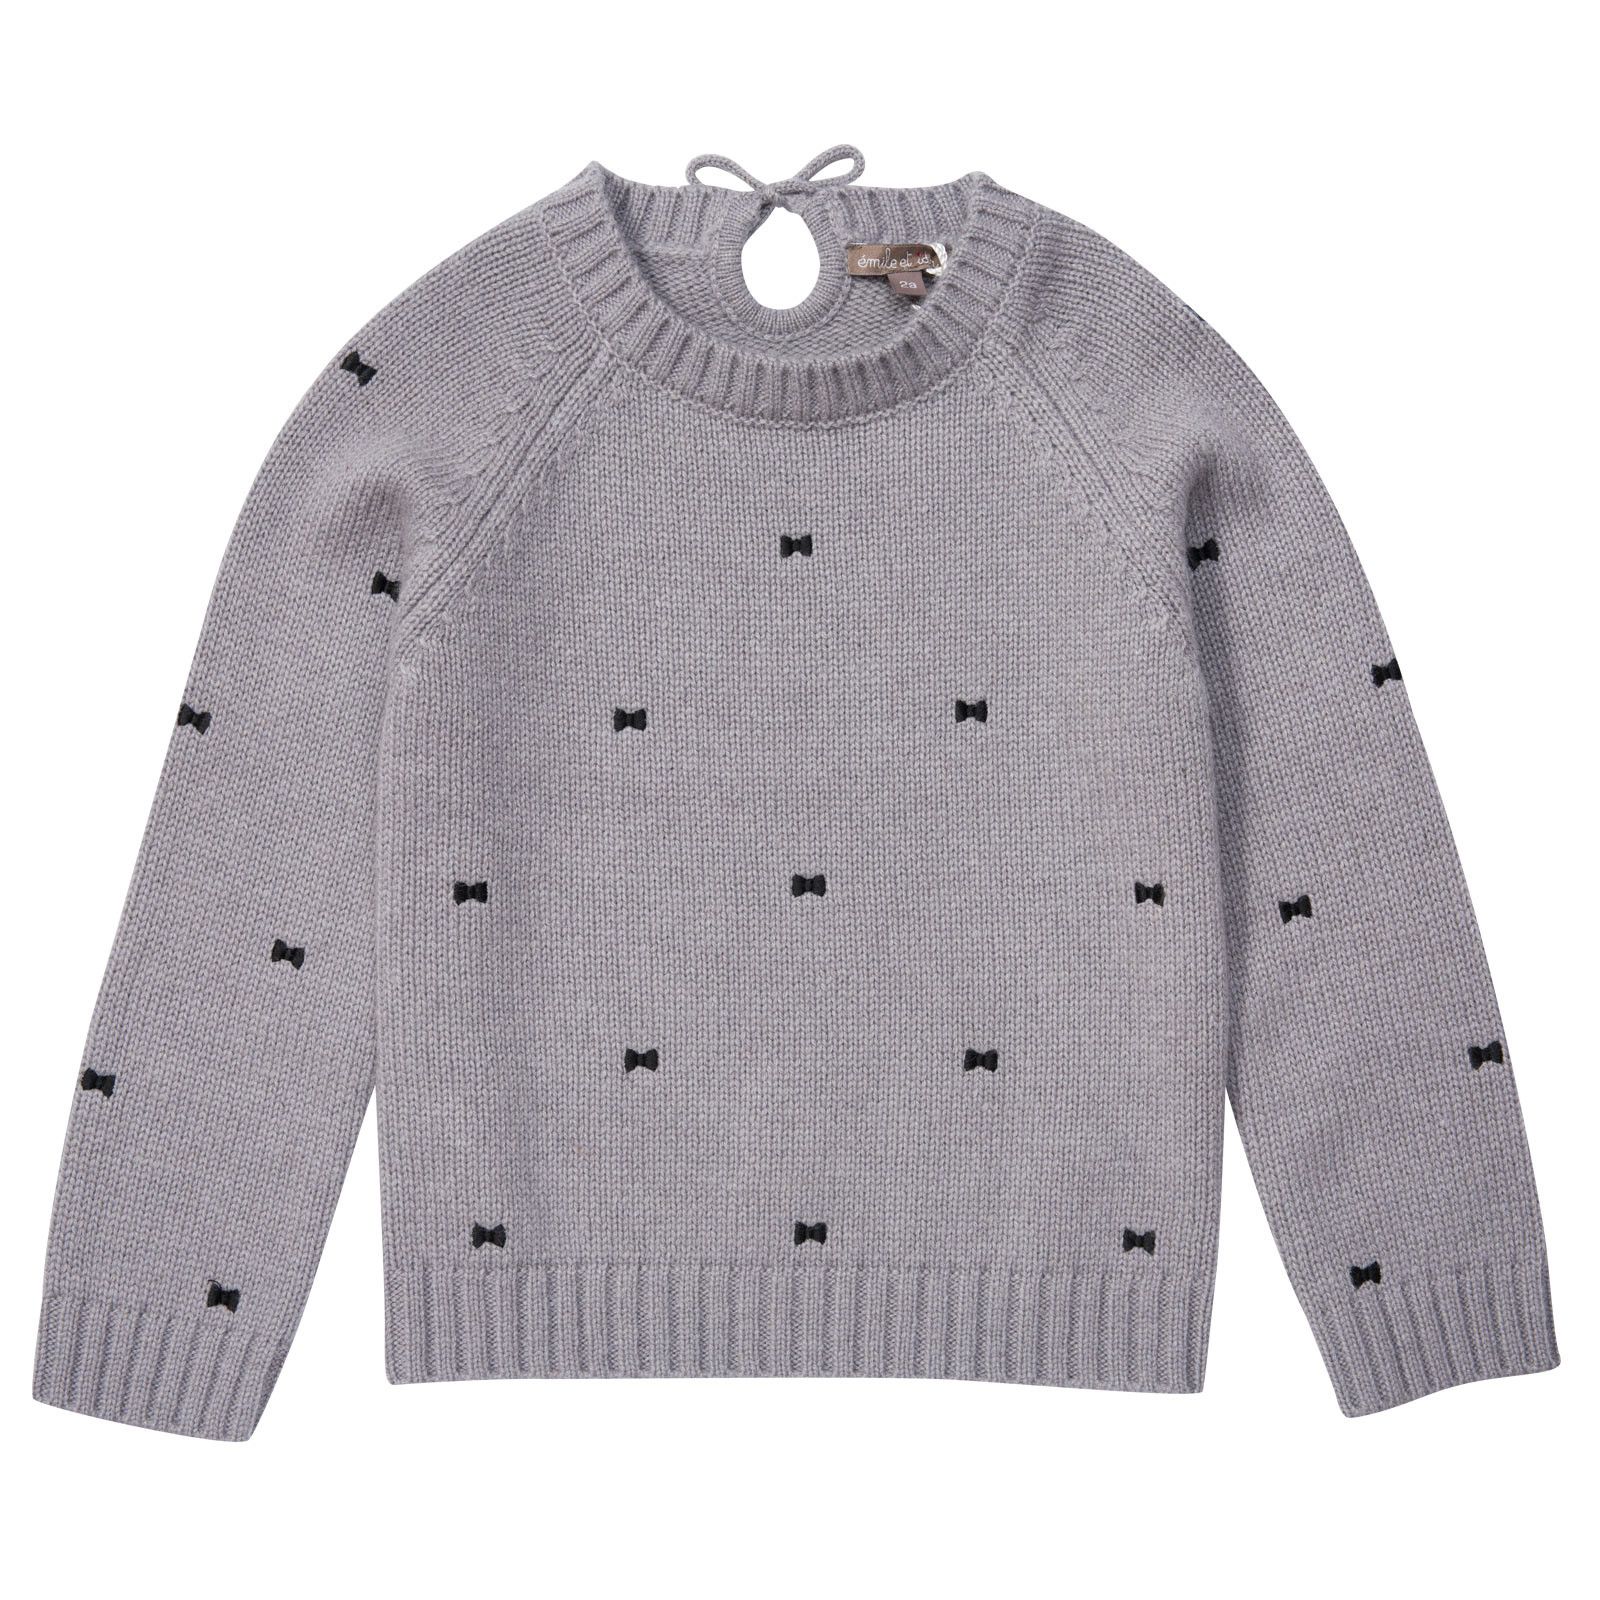 Girls Grey Embroidered Bows Sweater - CÉMAROSE | Children's Fashion Store - 1